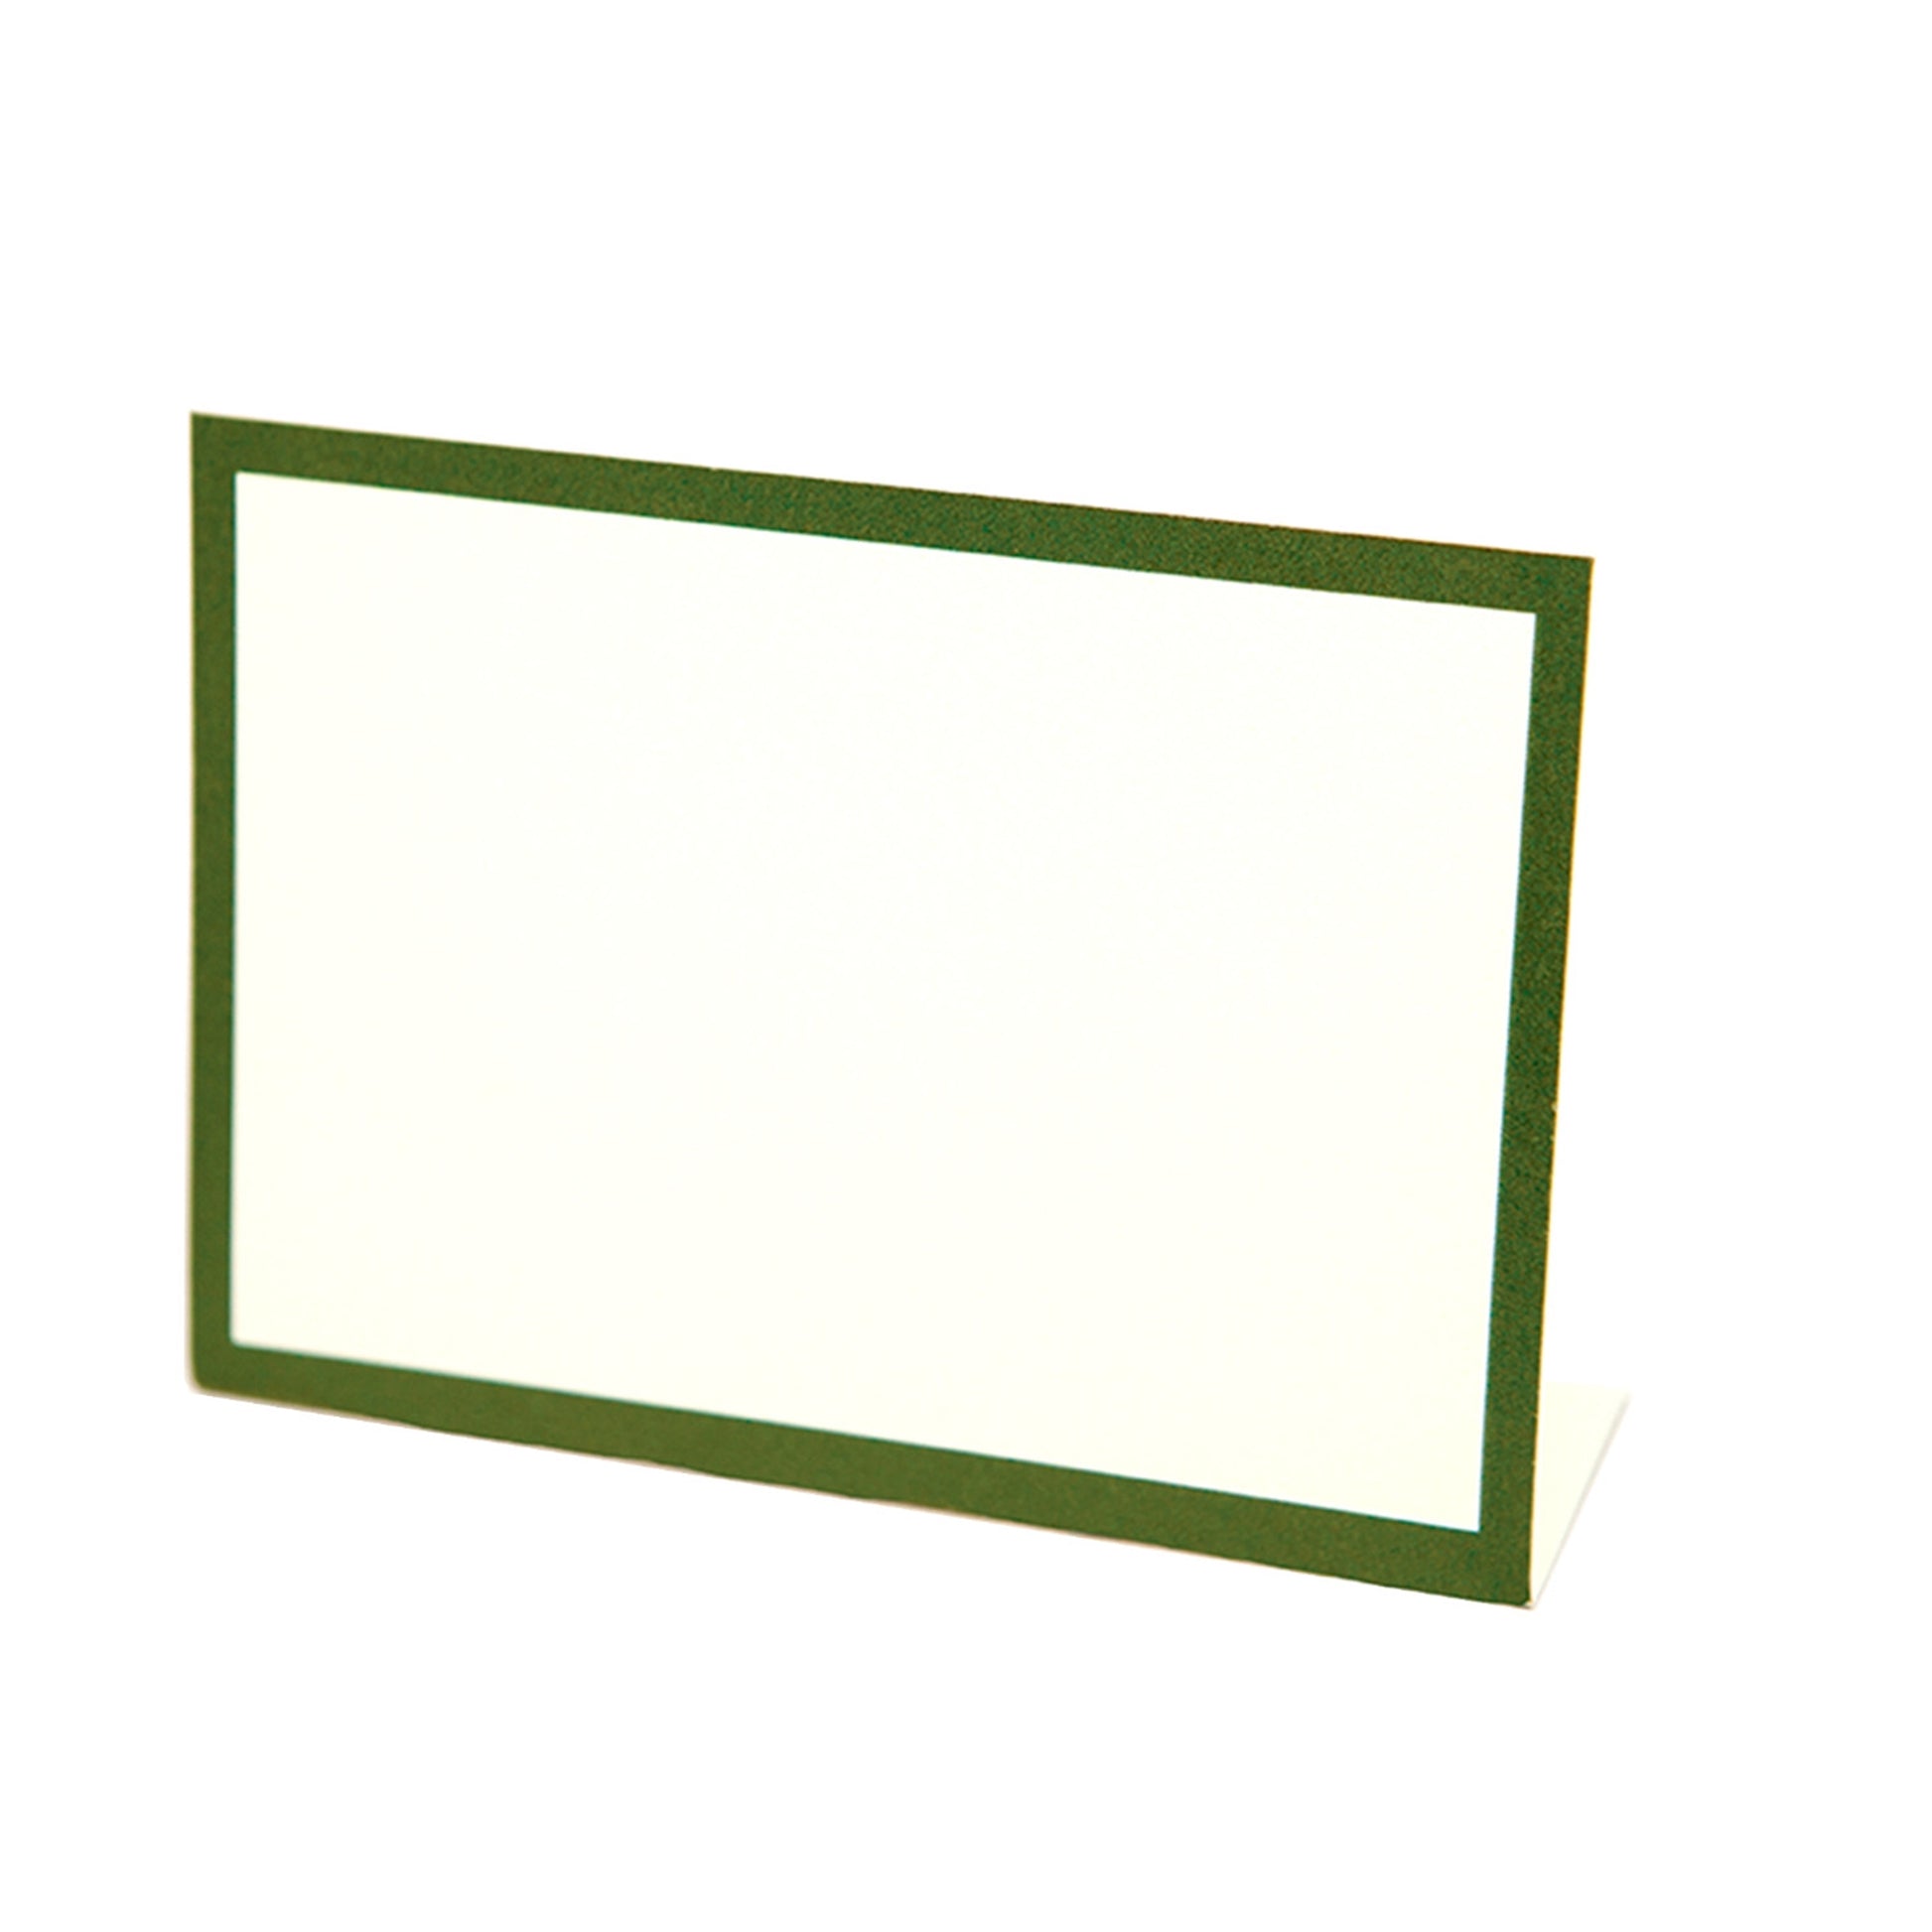 A square place card with a green boarder perfect fit to go with the watermelon paper placemat